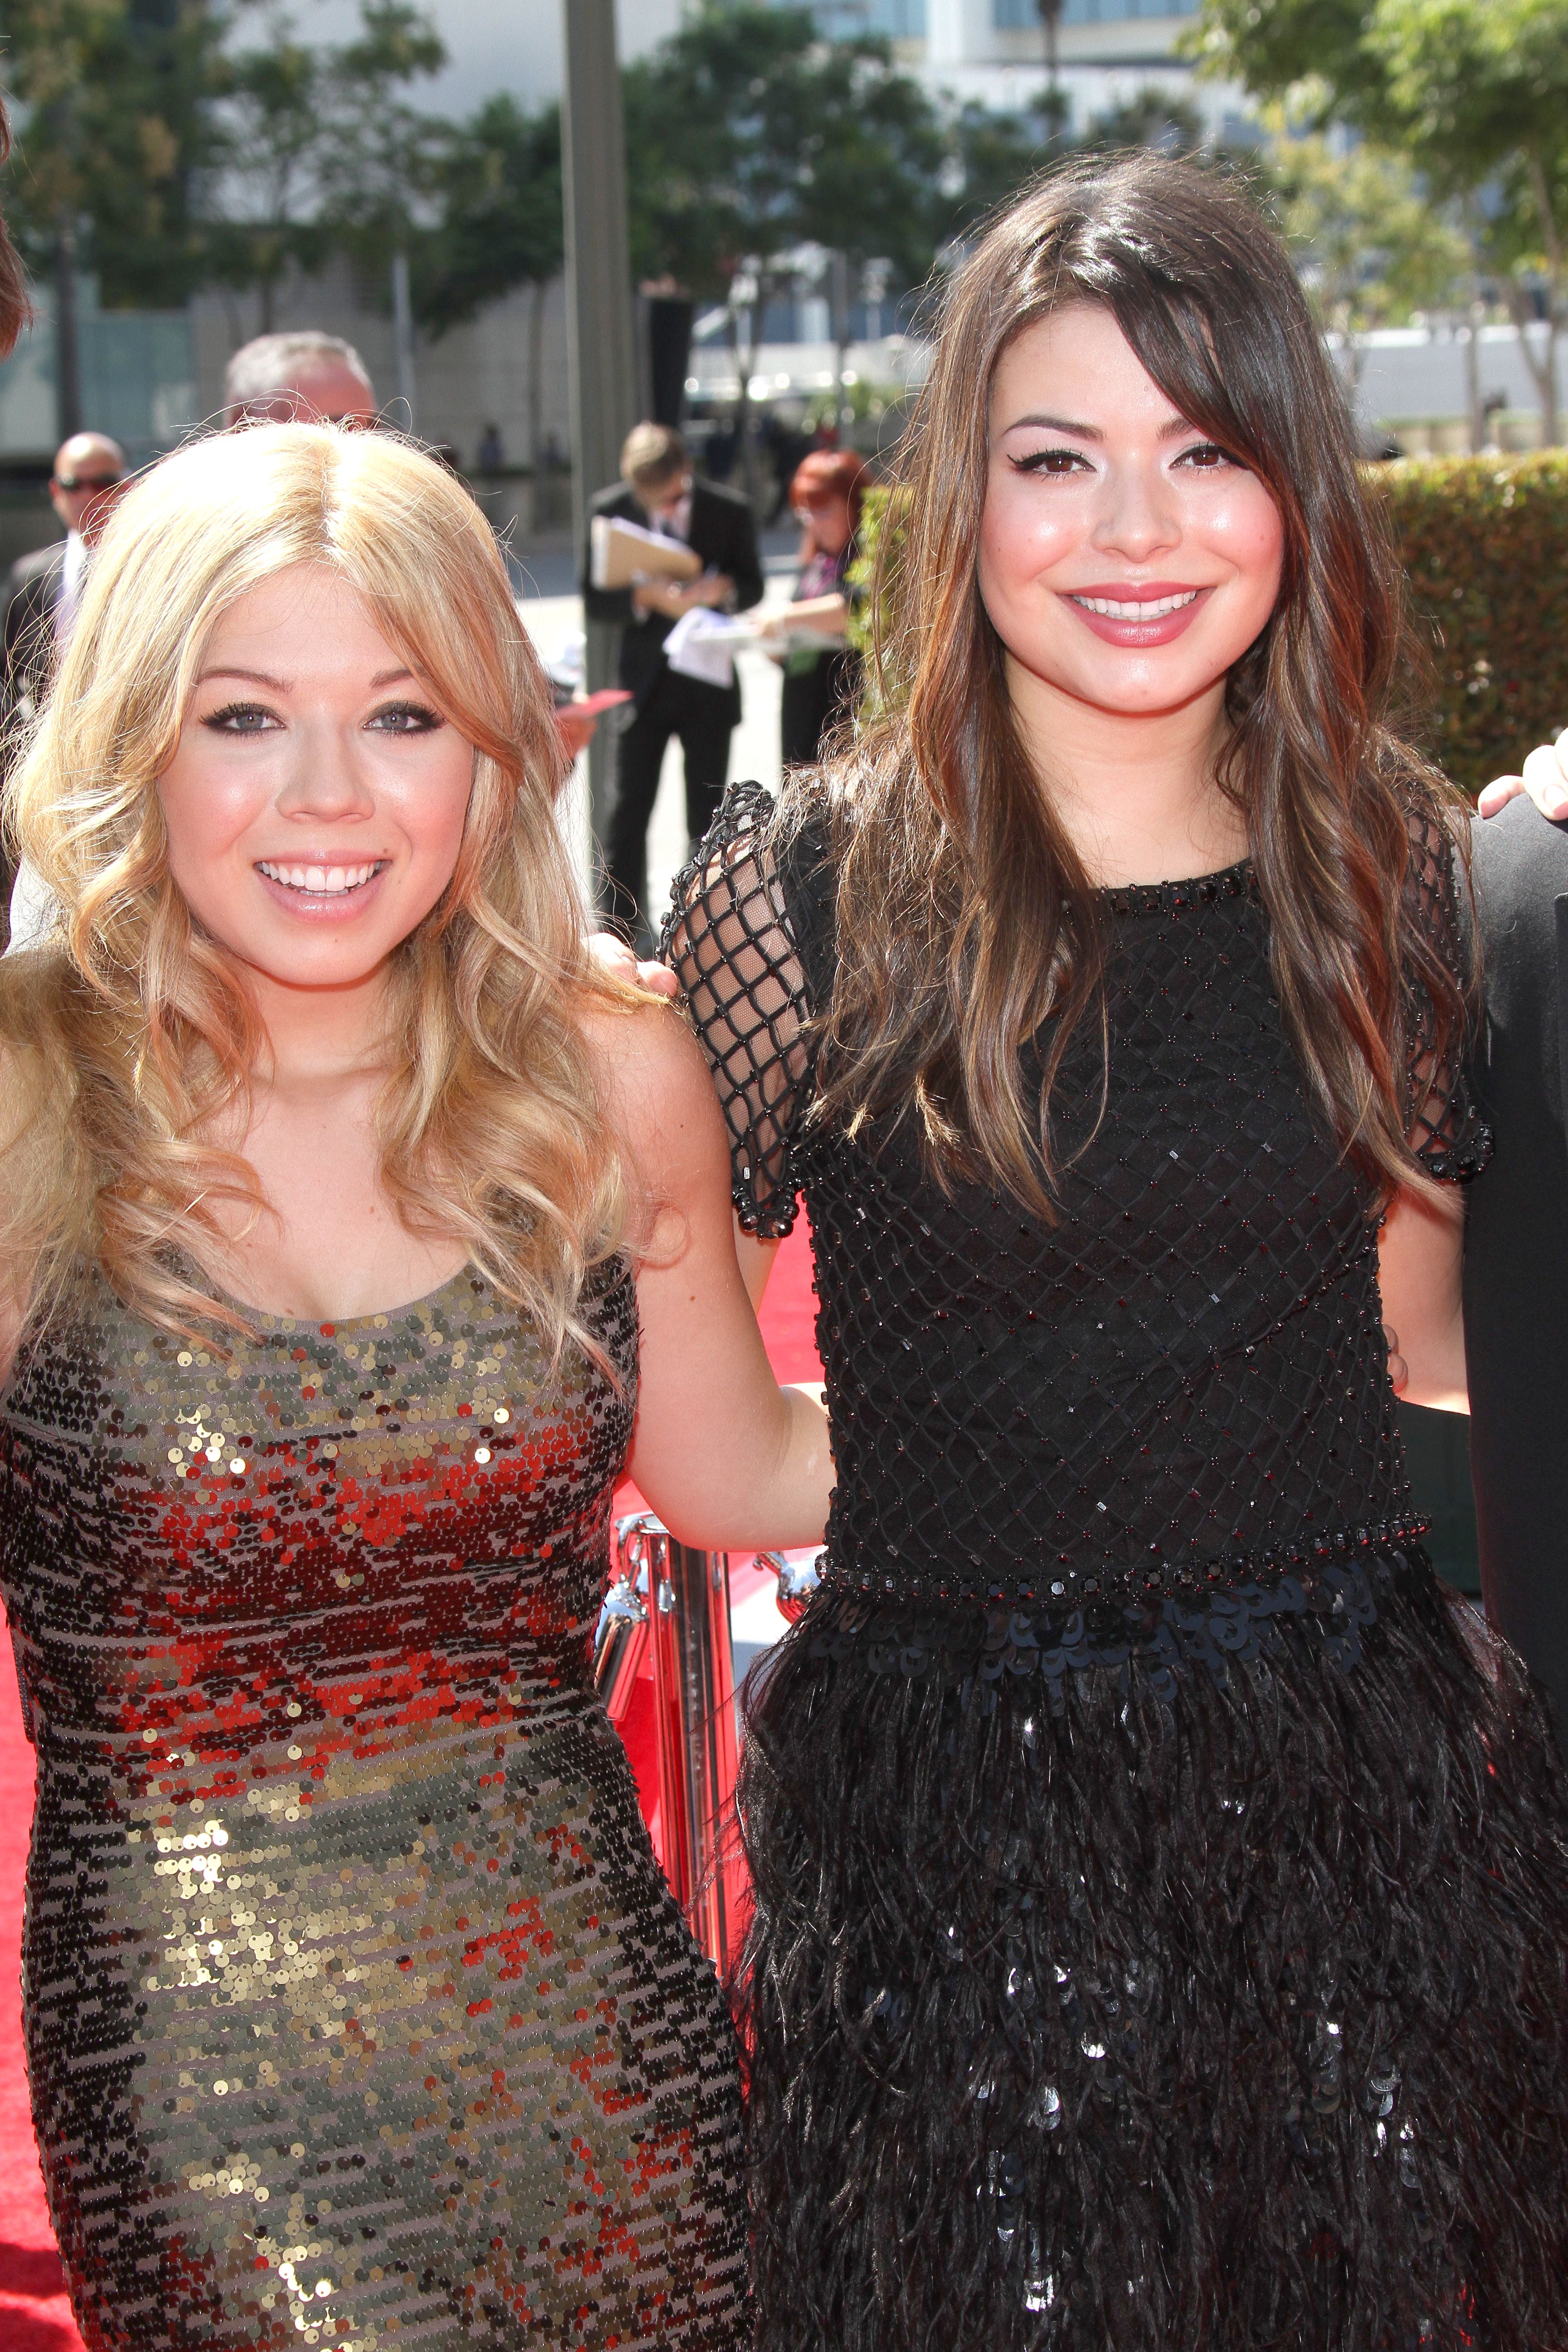 How Miranda Cosgrove Supports 'iCarly' Costar Jennette McCurdy